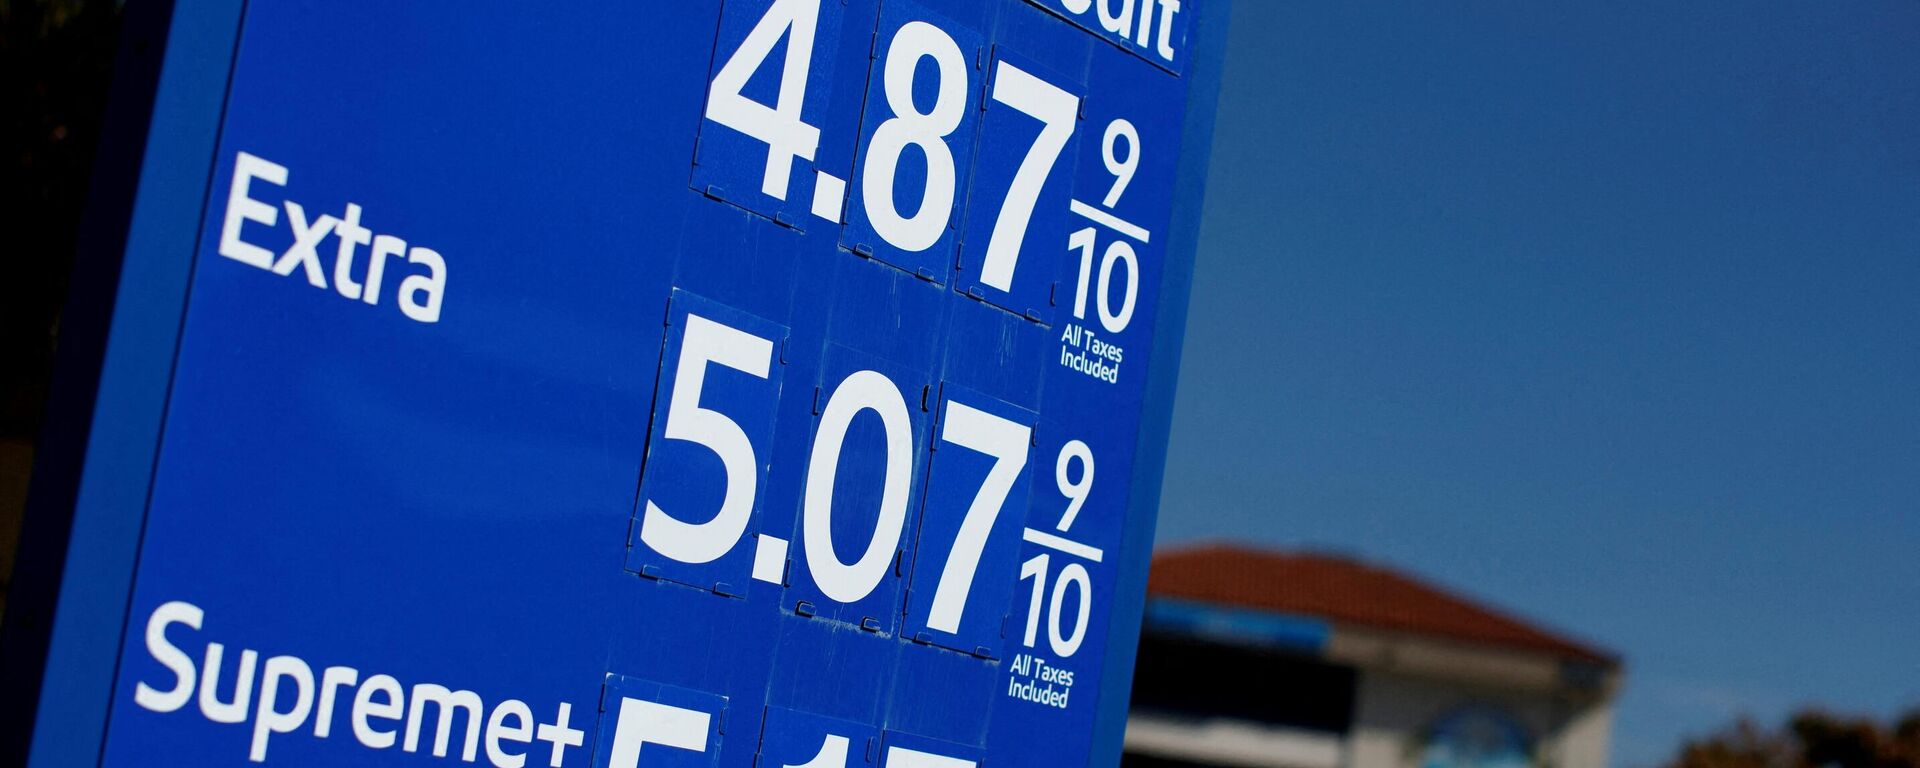 FILE PHOTO: Gas prices grow along with inflation as this sign at a gas station shows in San Diego, California, U.S. November, 9, 2021.  REUTERS/Mike Blake/File Photo - Sputnik International, 1920, 25.03.2022